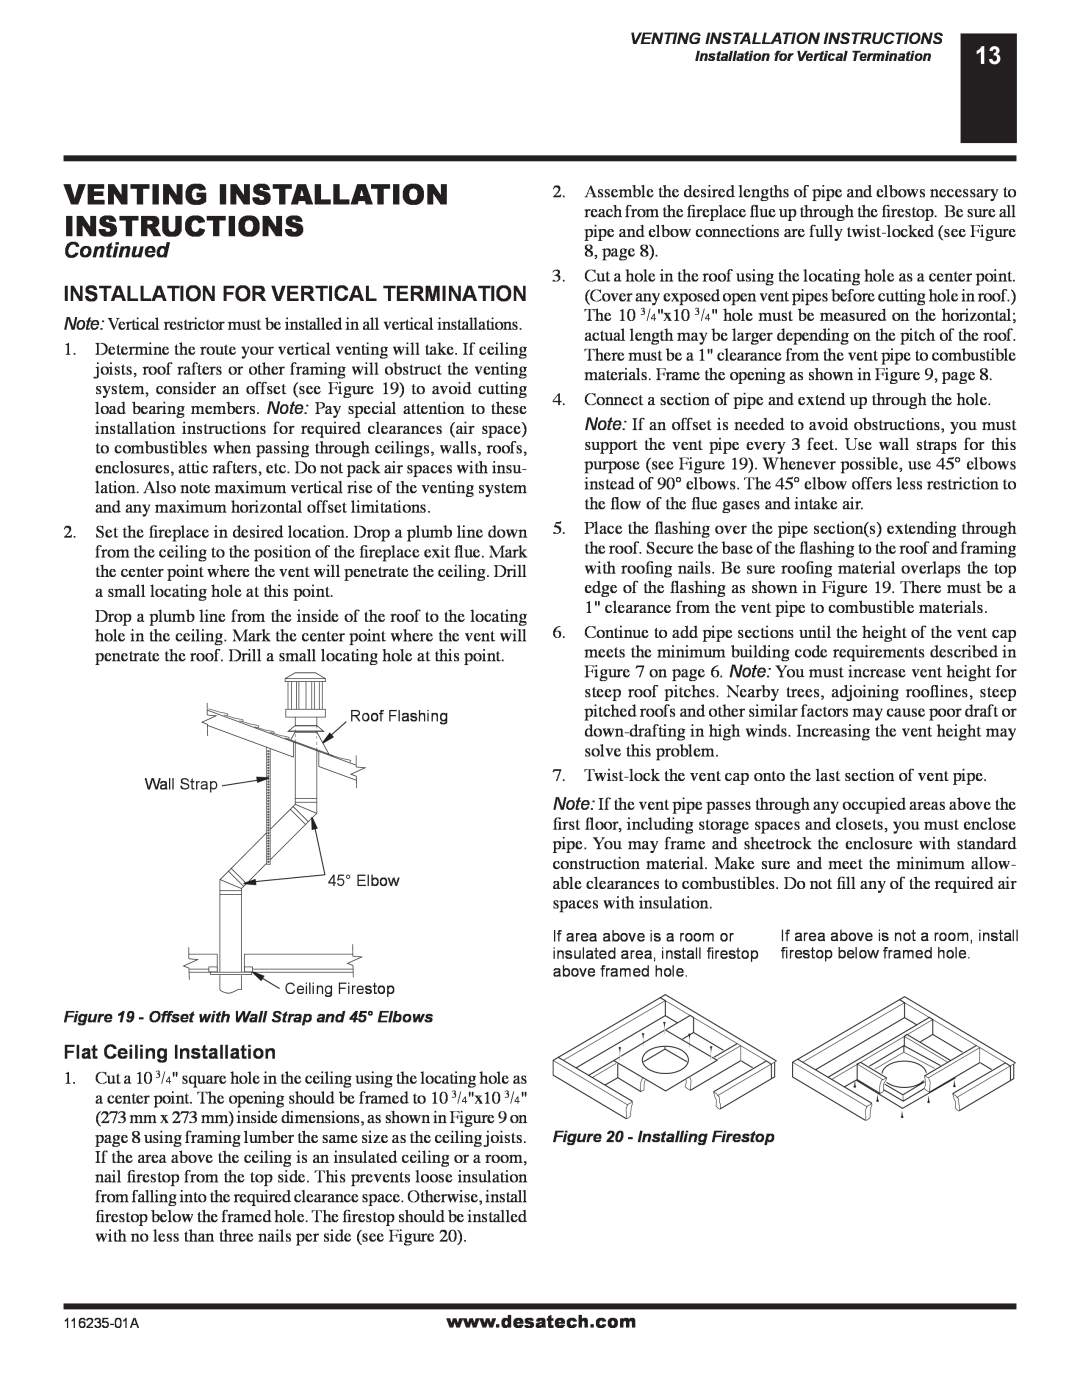 Desa (V)VC36NE Series Venting Installation Instructions, Continued, Installation For Vertical Termination 